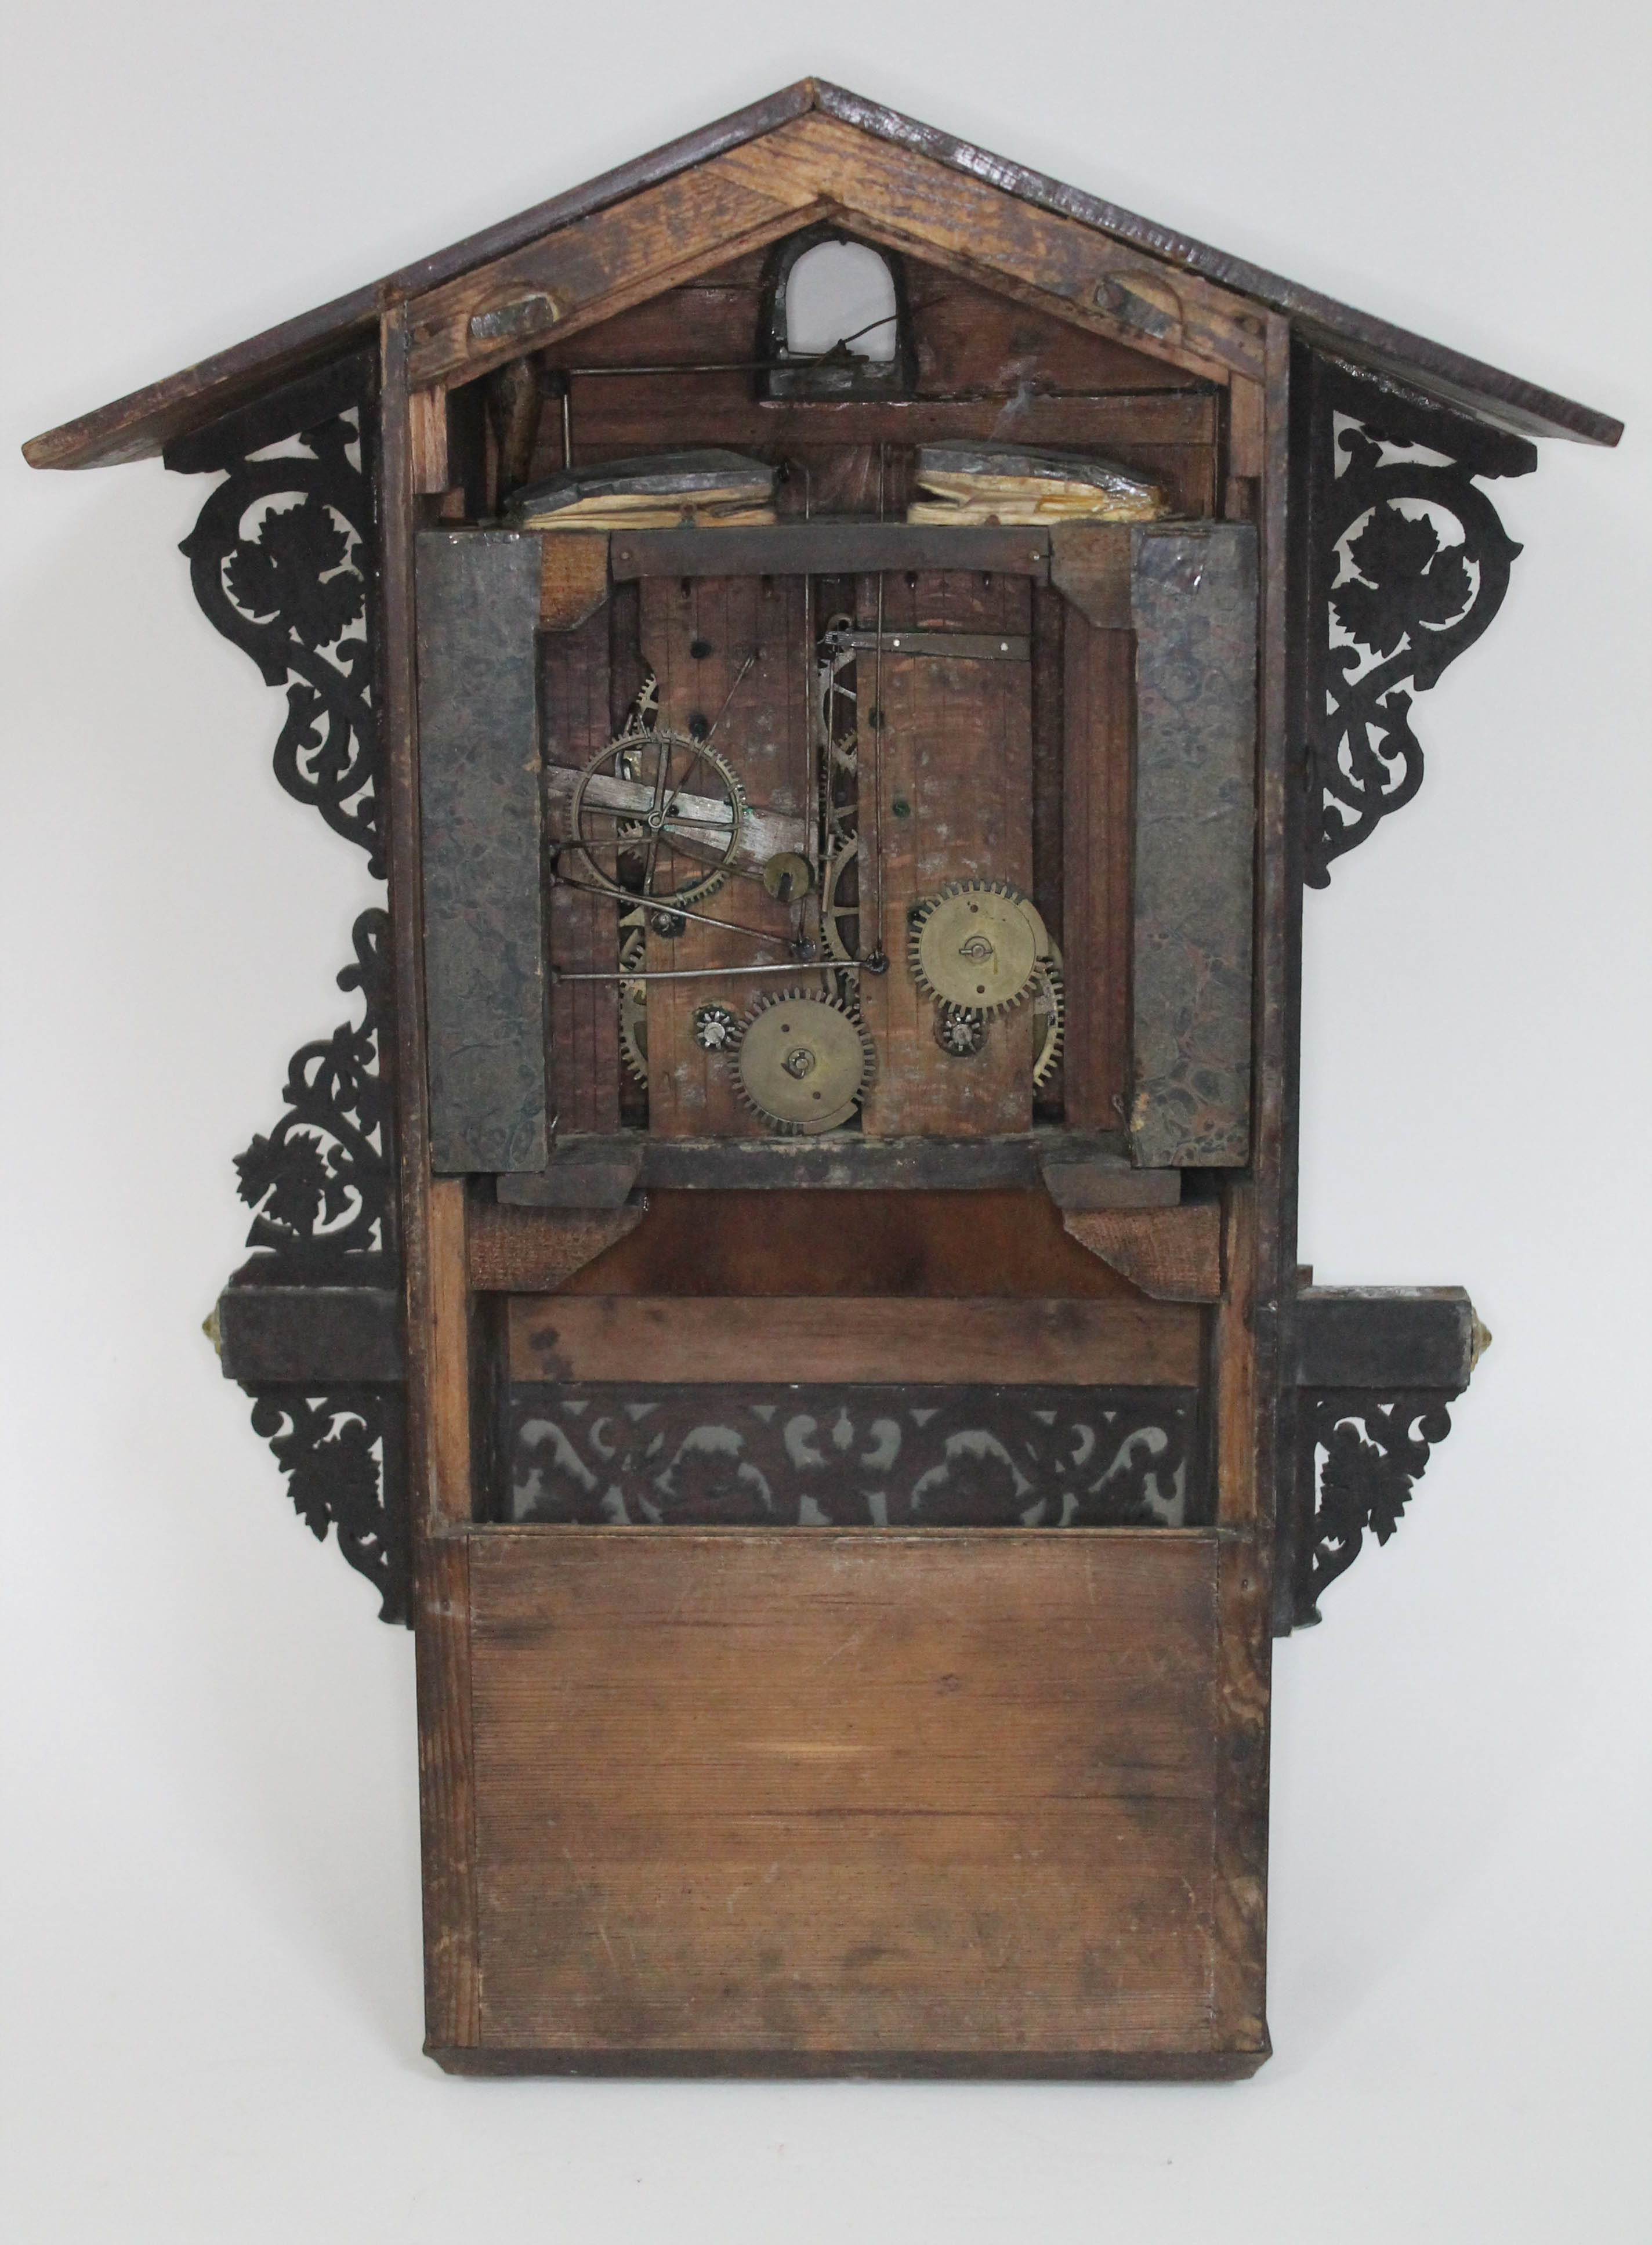 A 19th century Black Forest walnut cuckoo clock, chalet style case with fretwork, 4 1/4" dial - Image 6 of 12